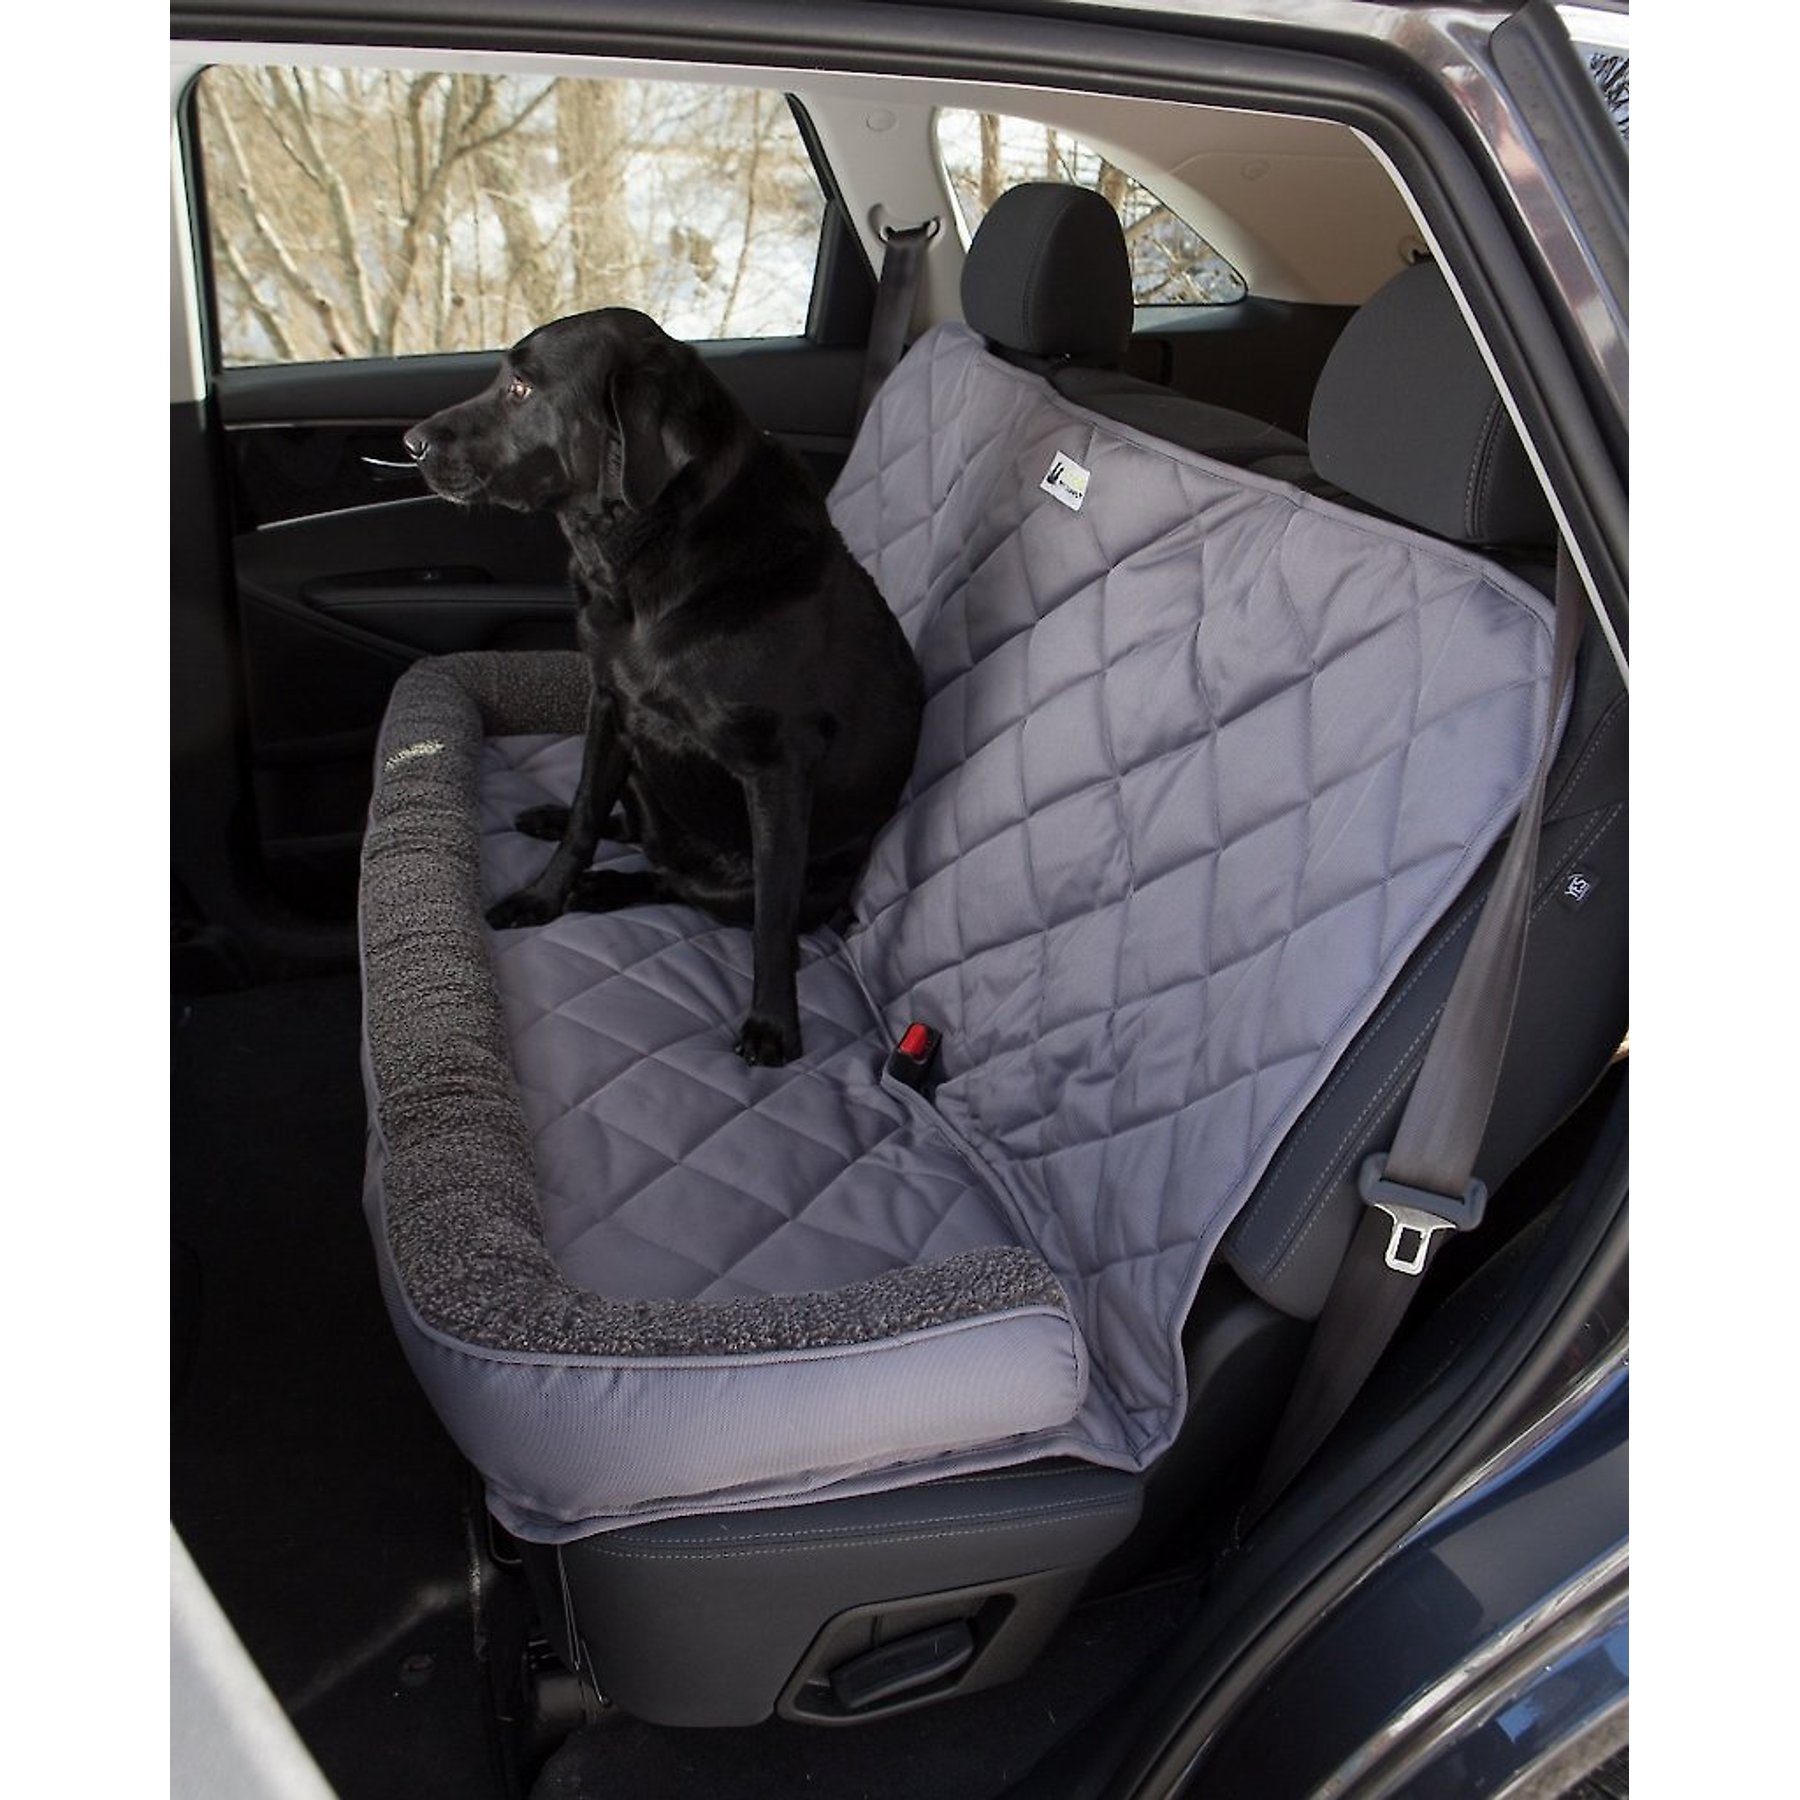 3 Dog Pet Supply Quilted Back Seat Protector with Fleece Bolster - Grey